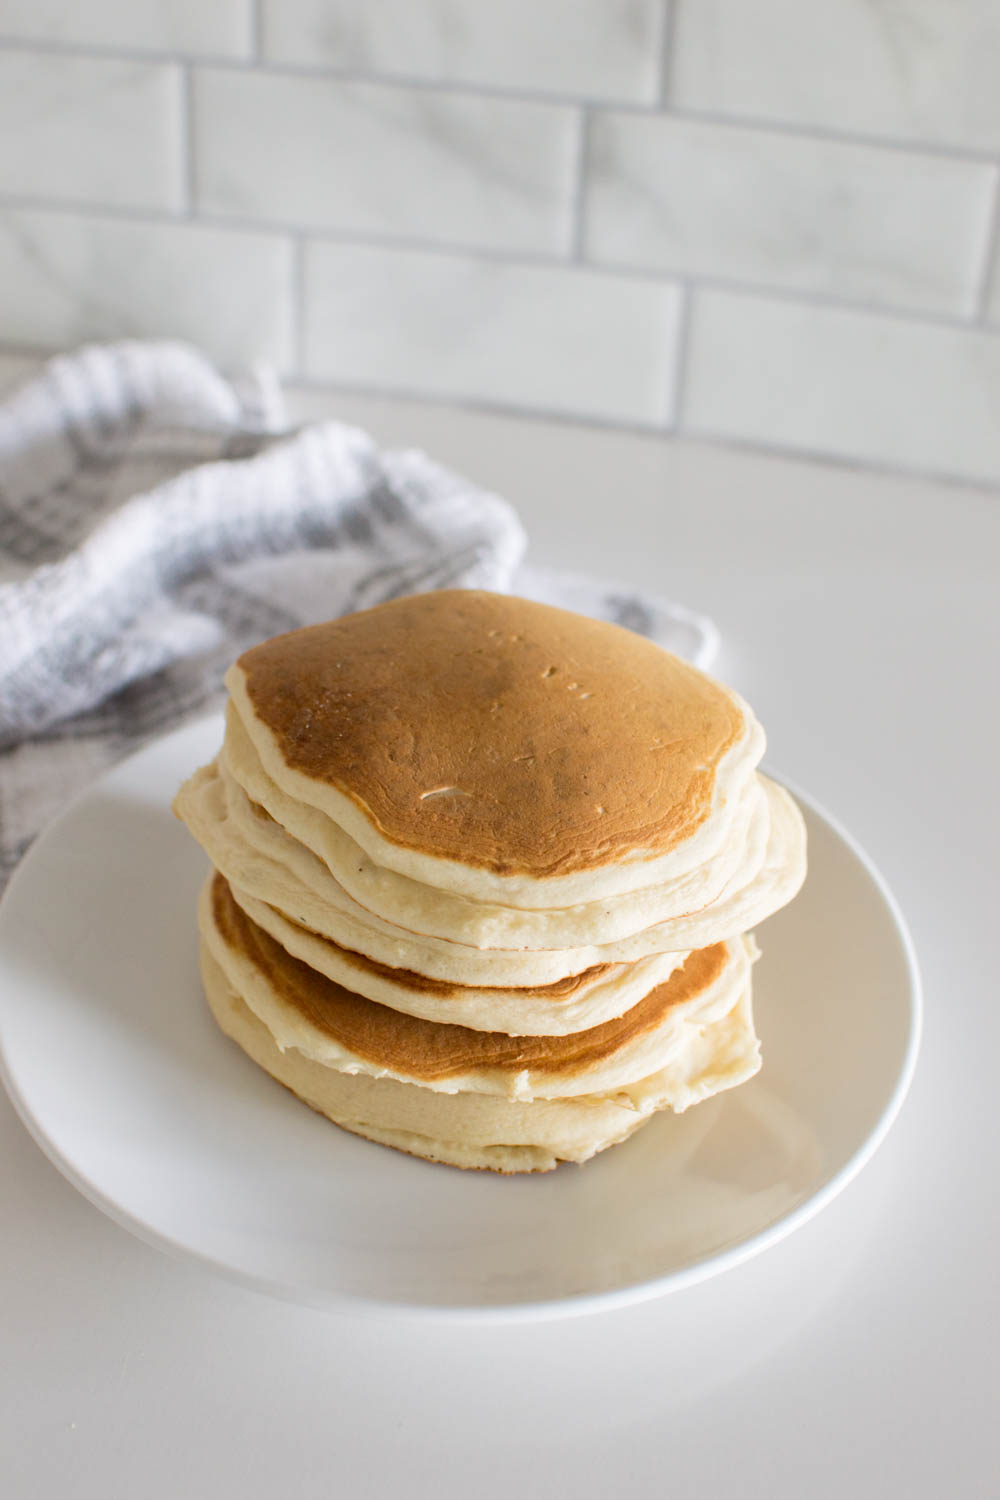 A stack of homemade pancakes on a white plate